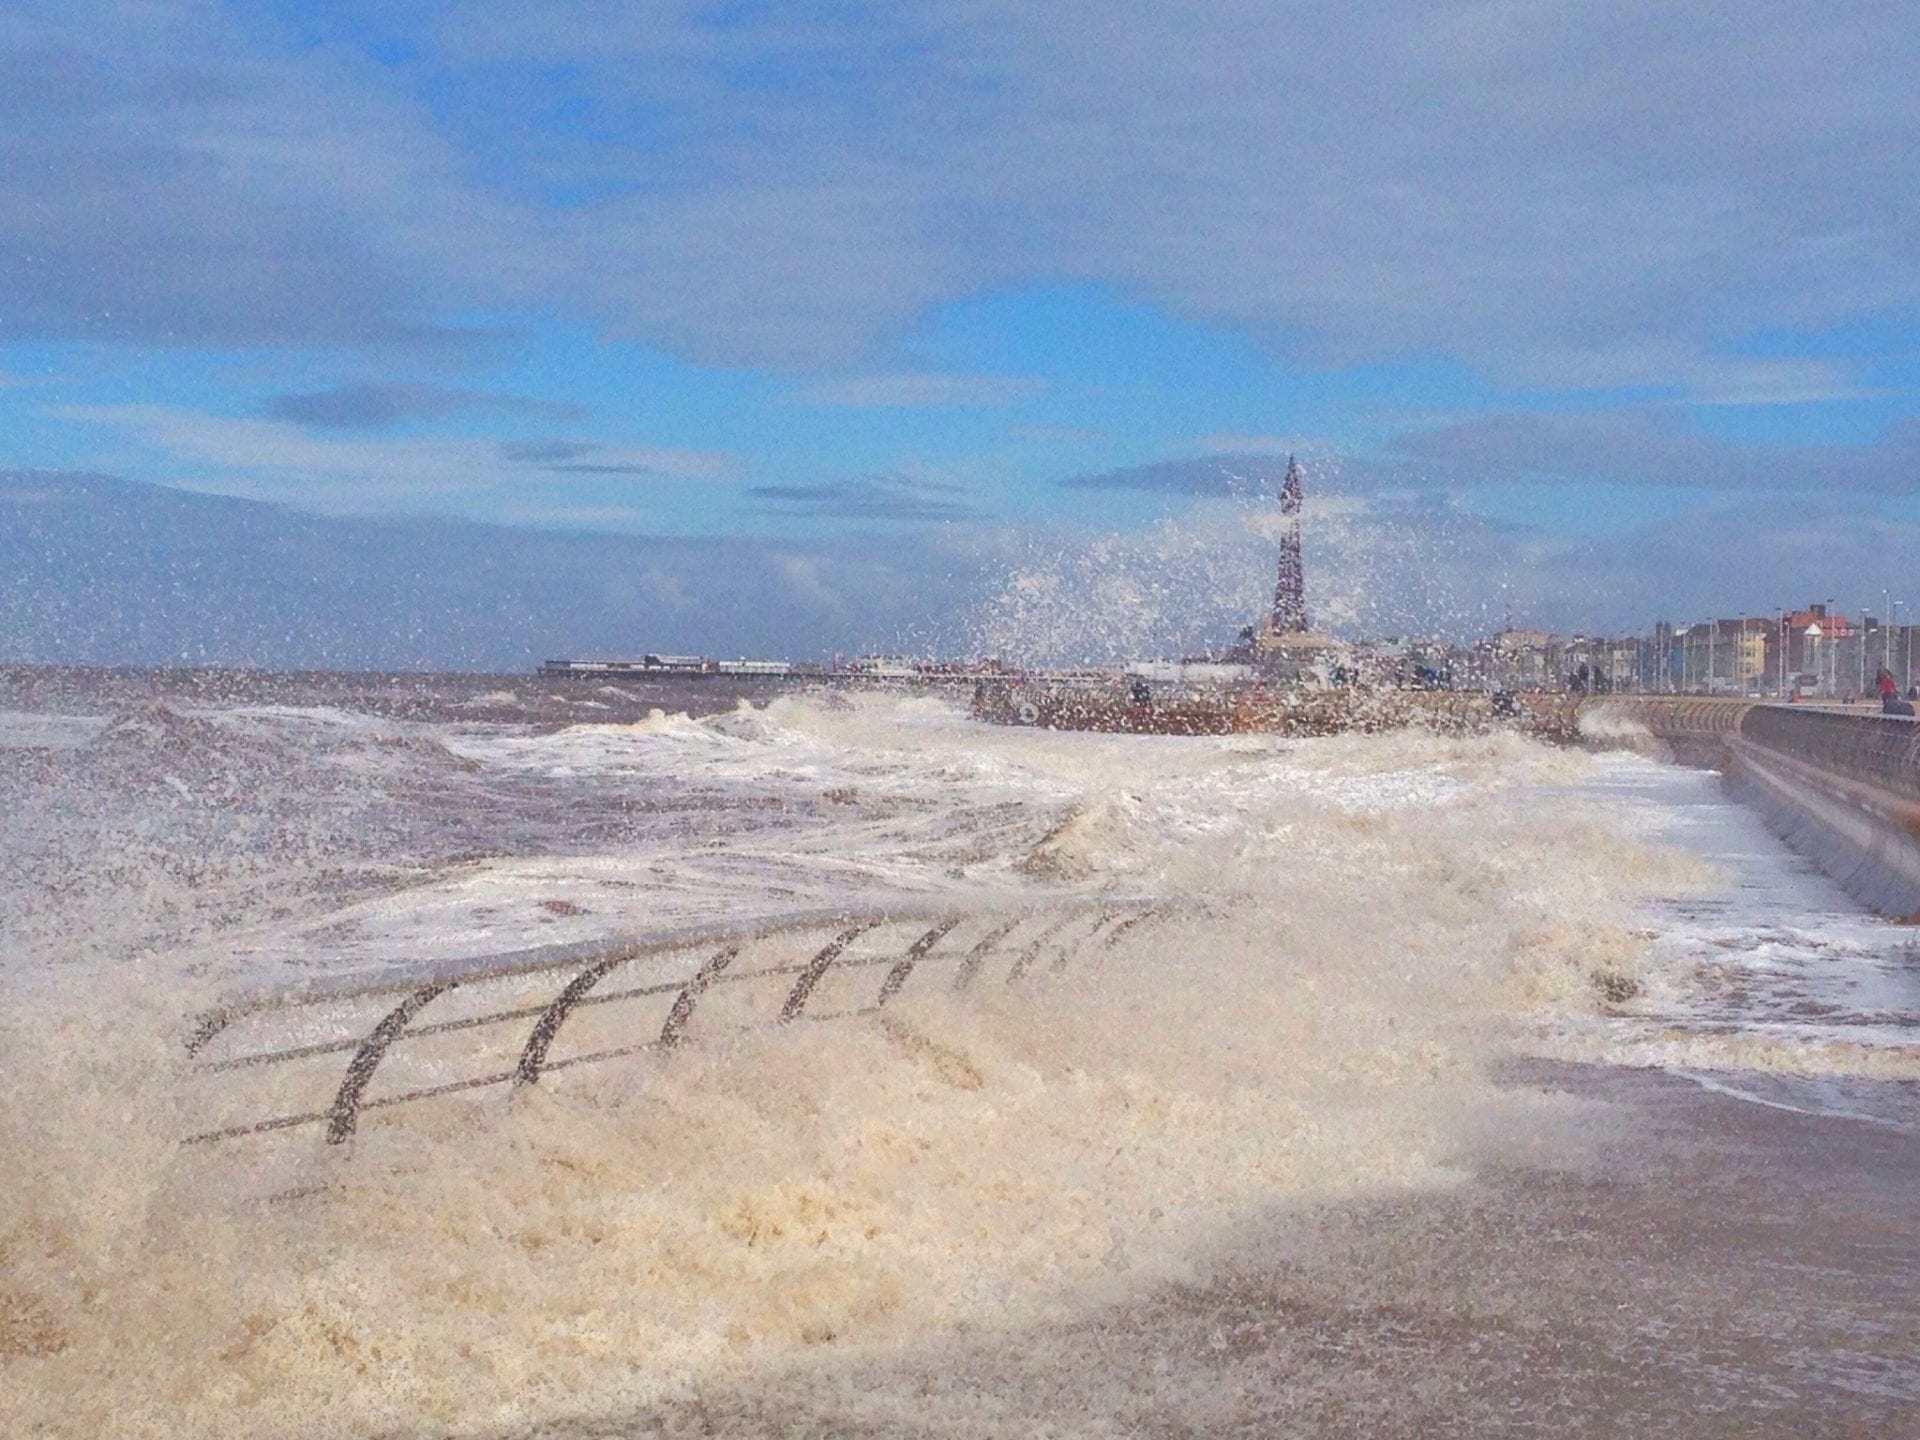 High Tide in Blackpool, by Andrew Hudson (7.4.16)